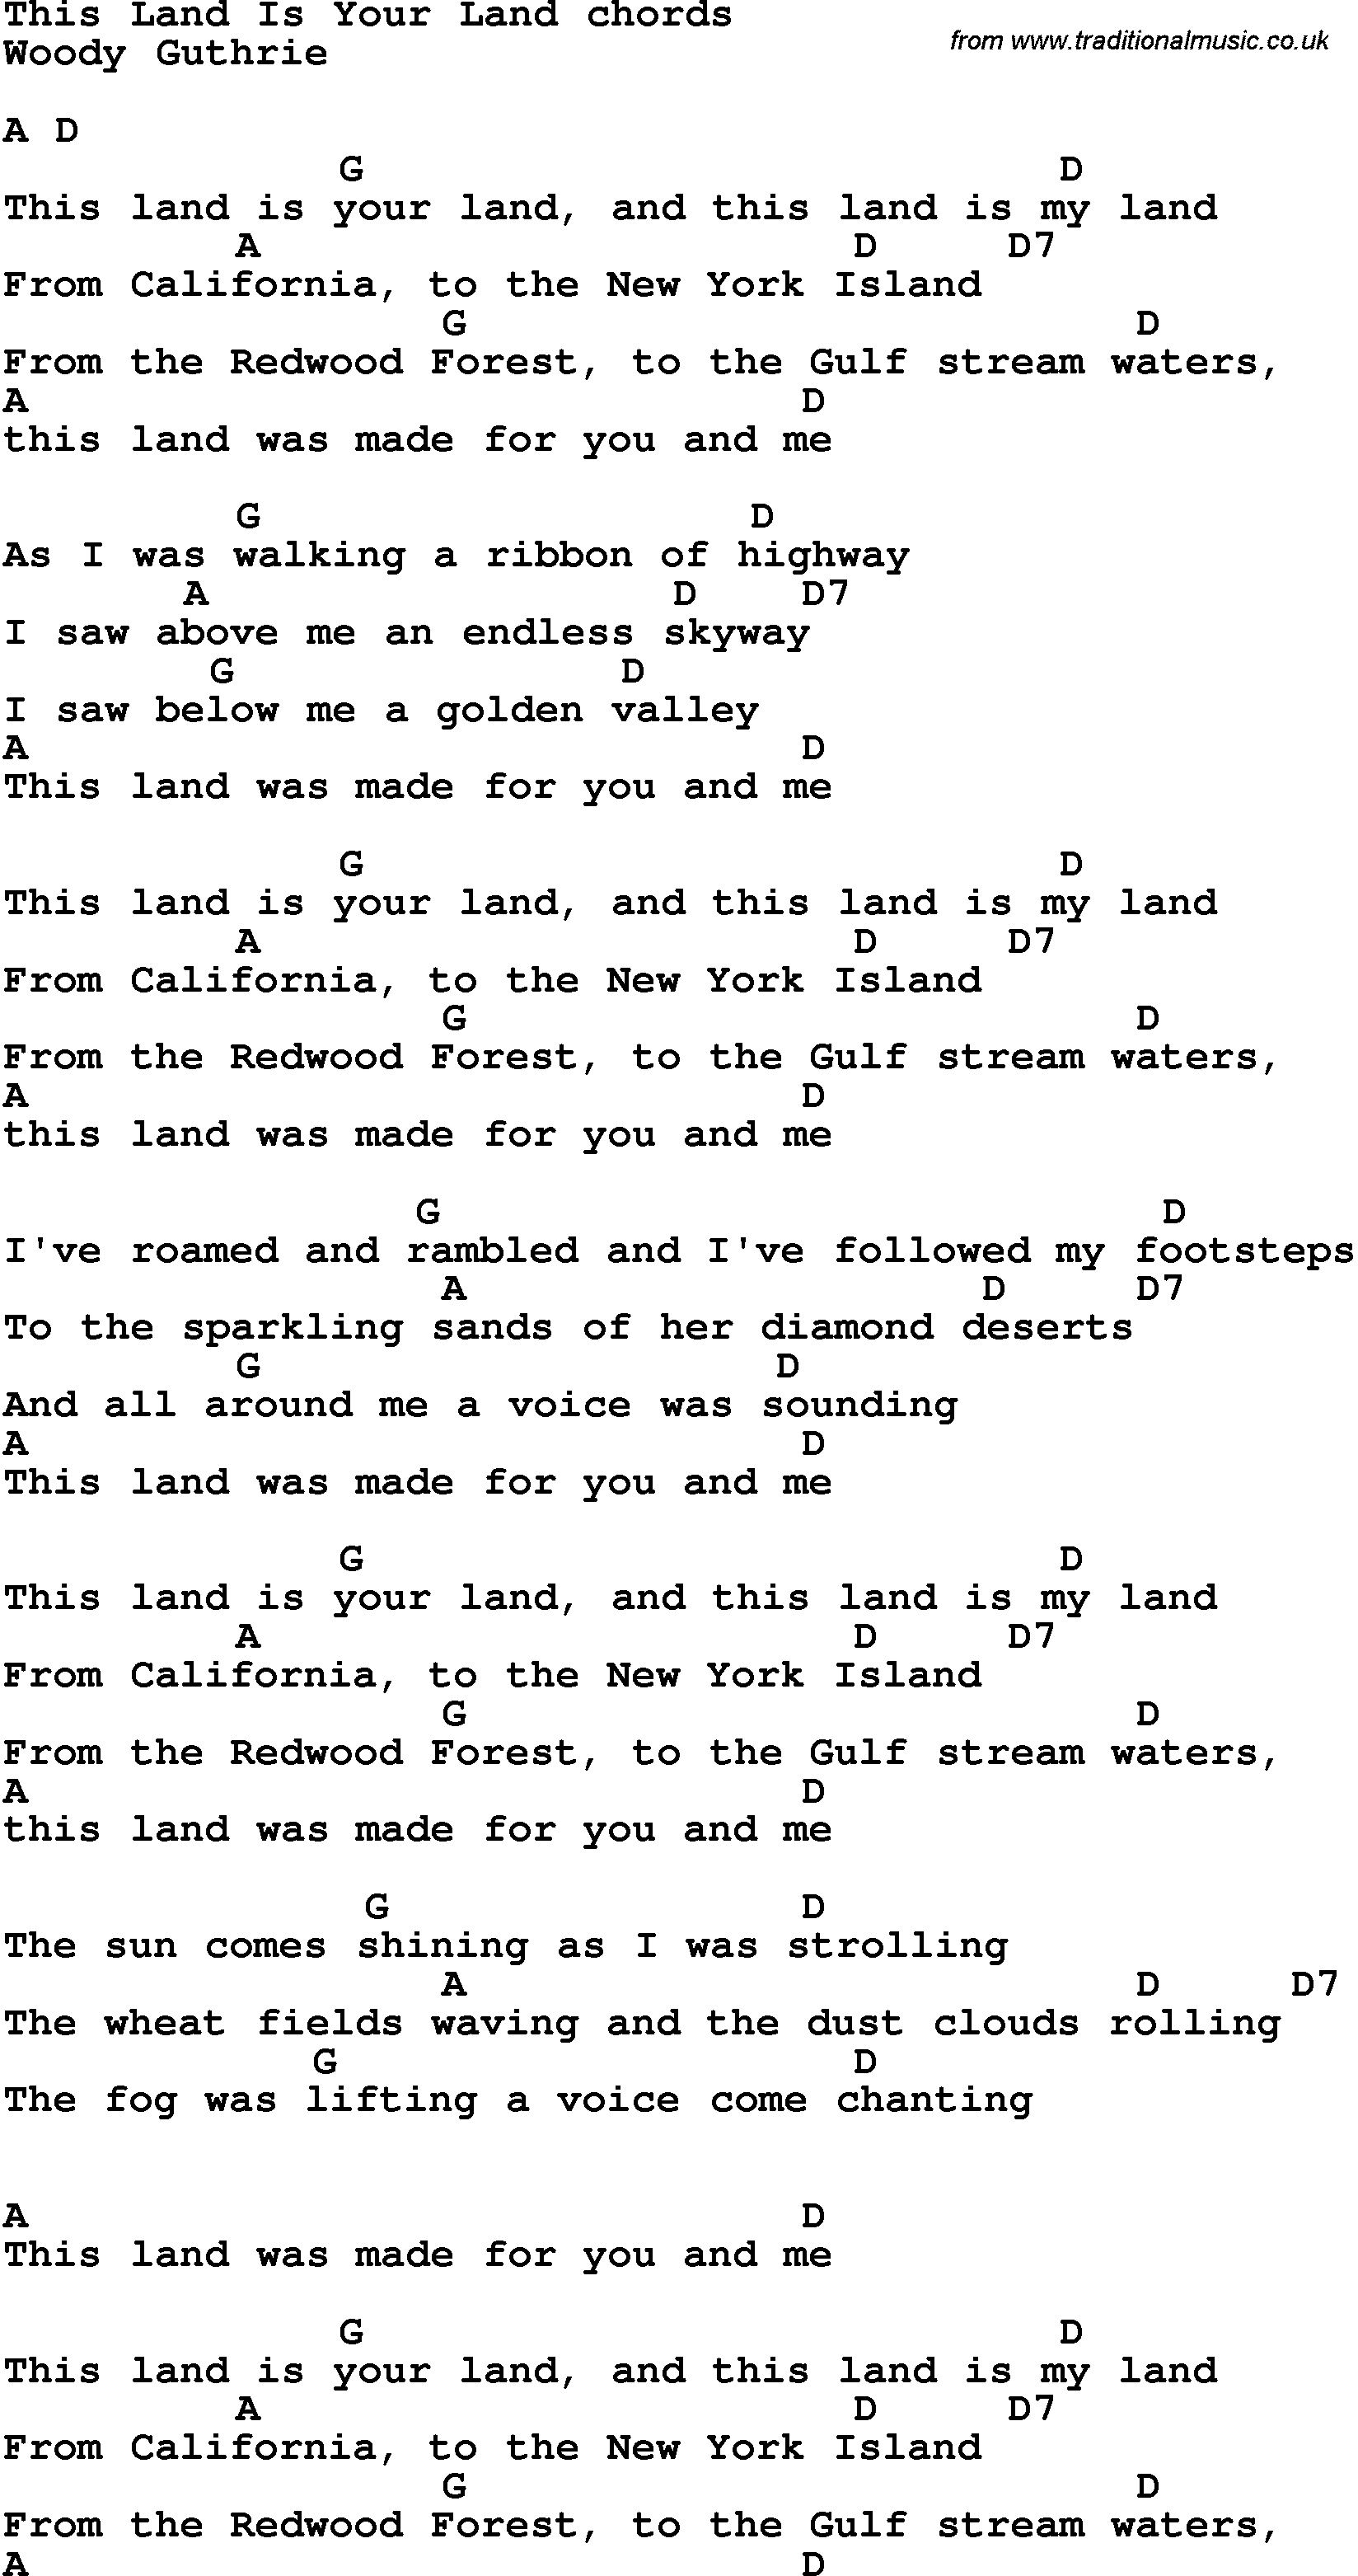 Song Lyrics with guitar chords for This Land Is Your Land